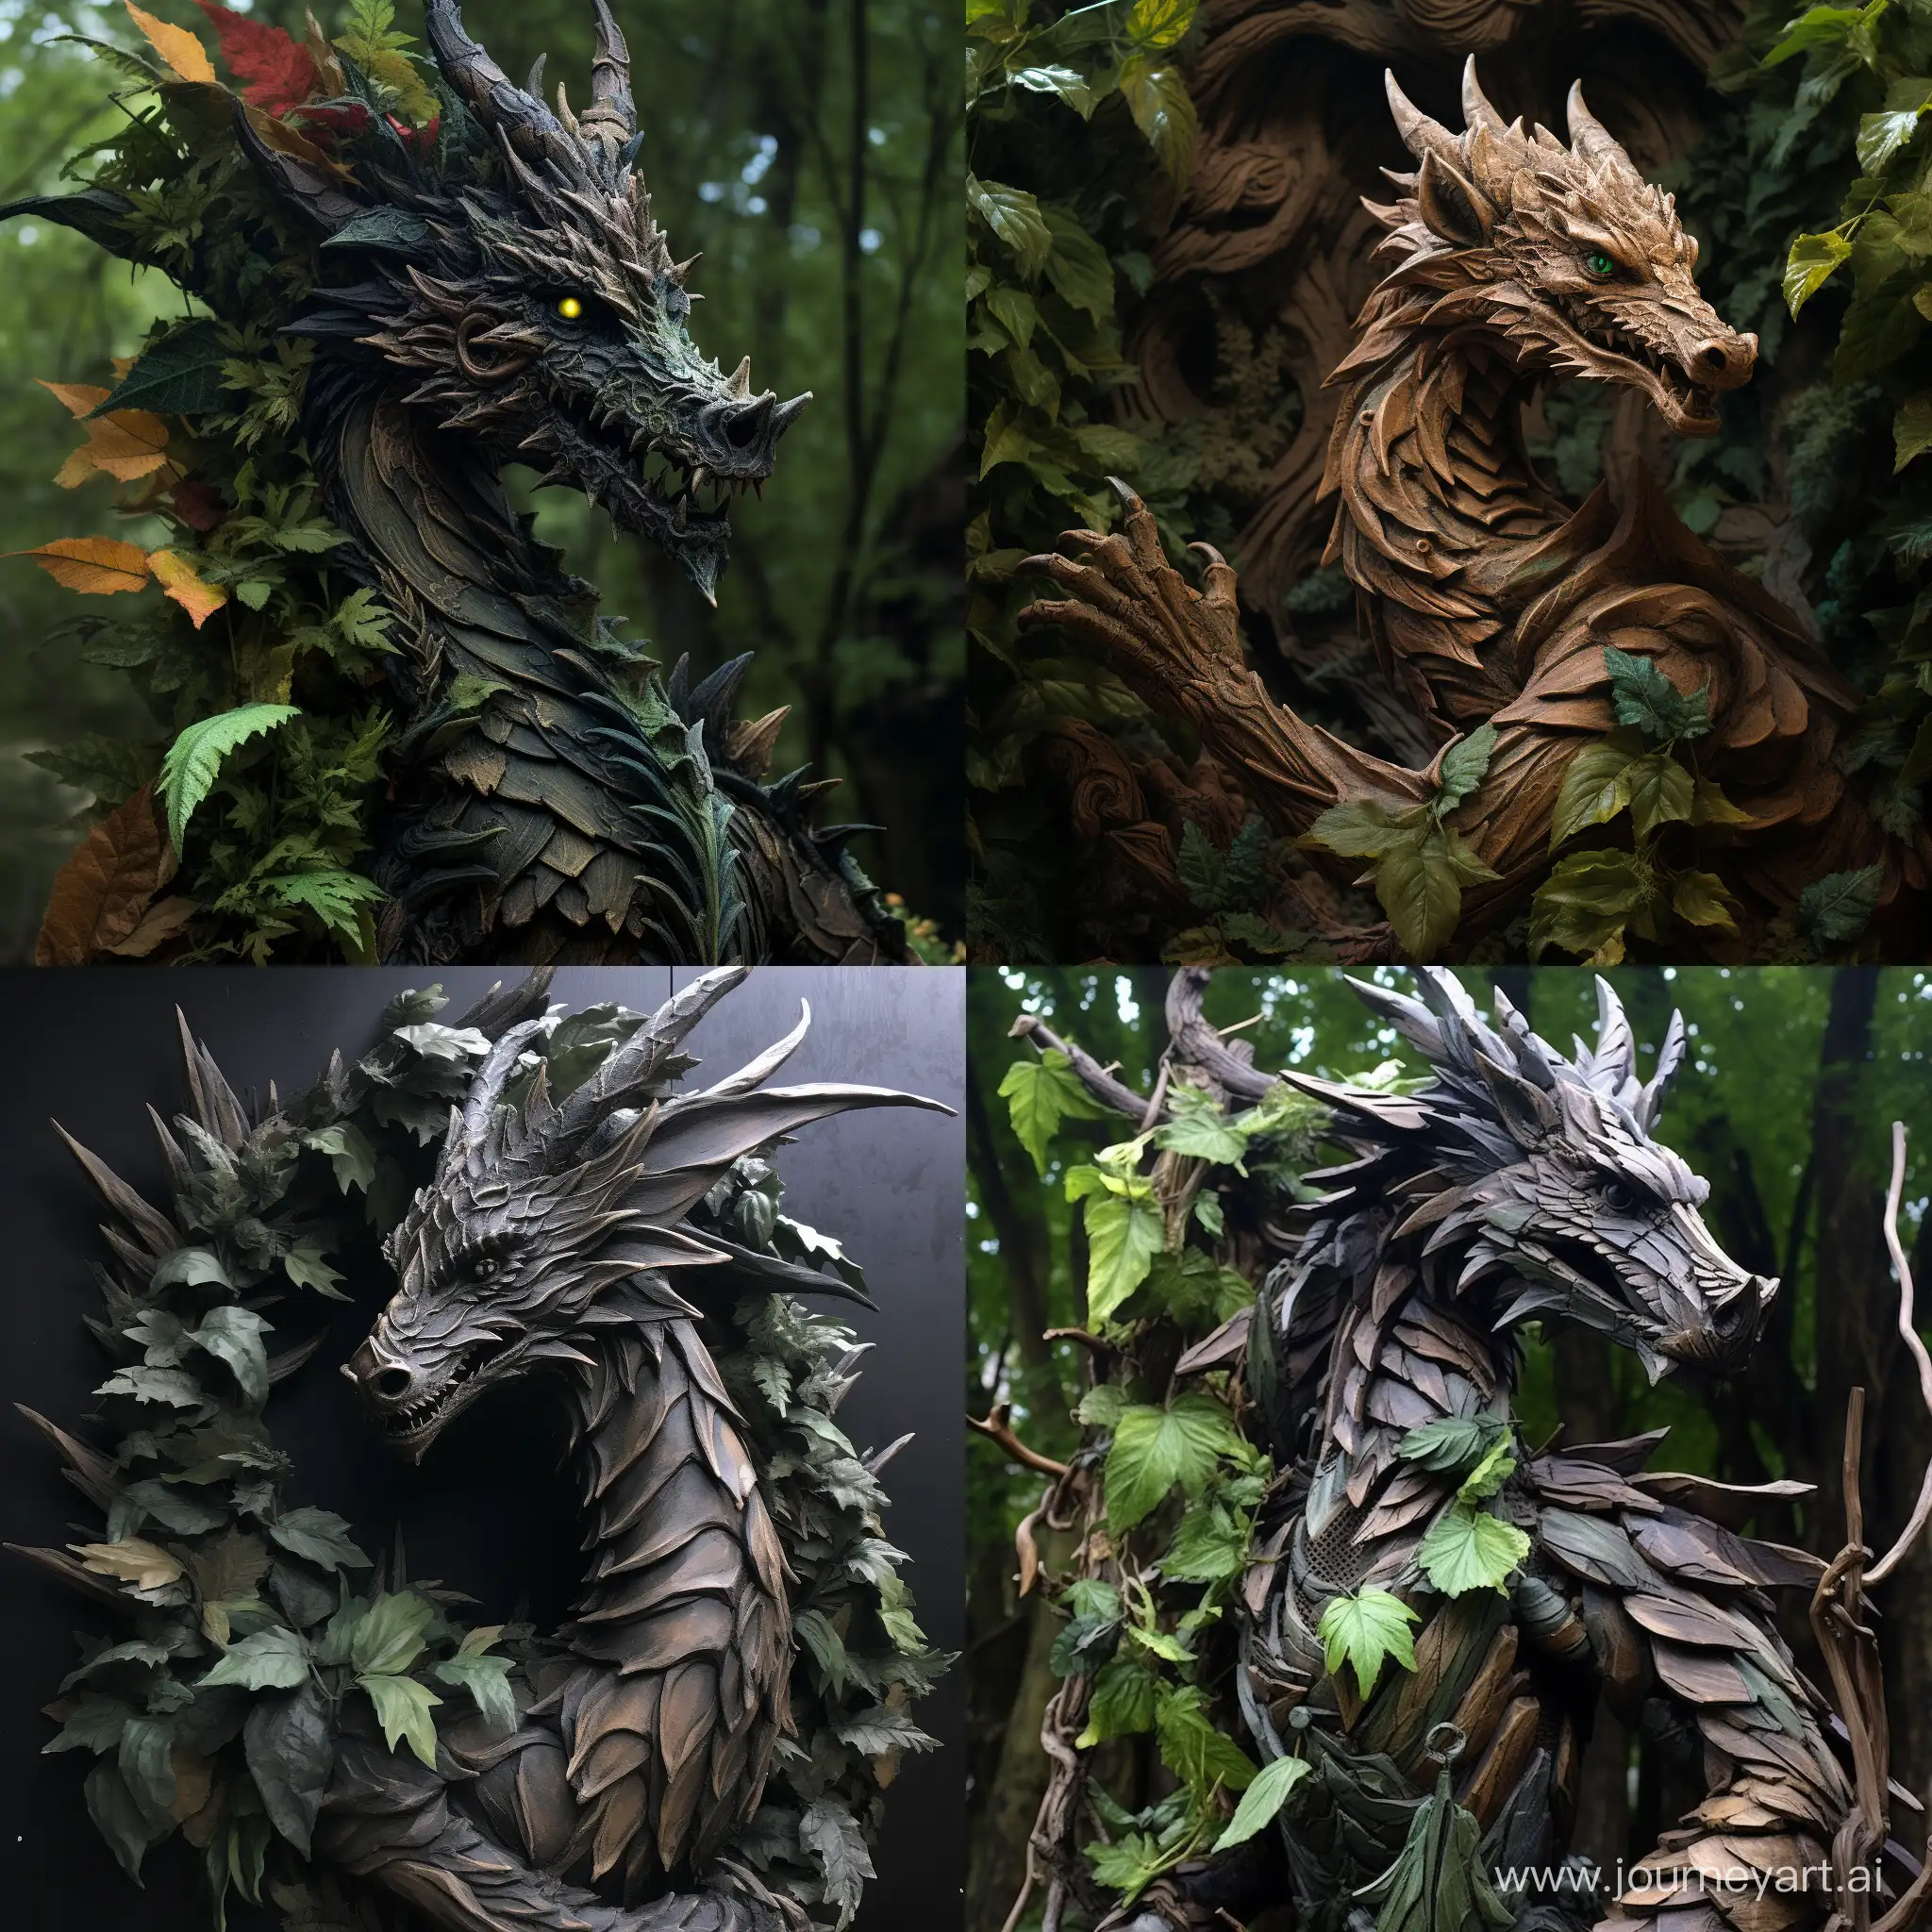 Majestic Gothic Dragon made of oak leaves